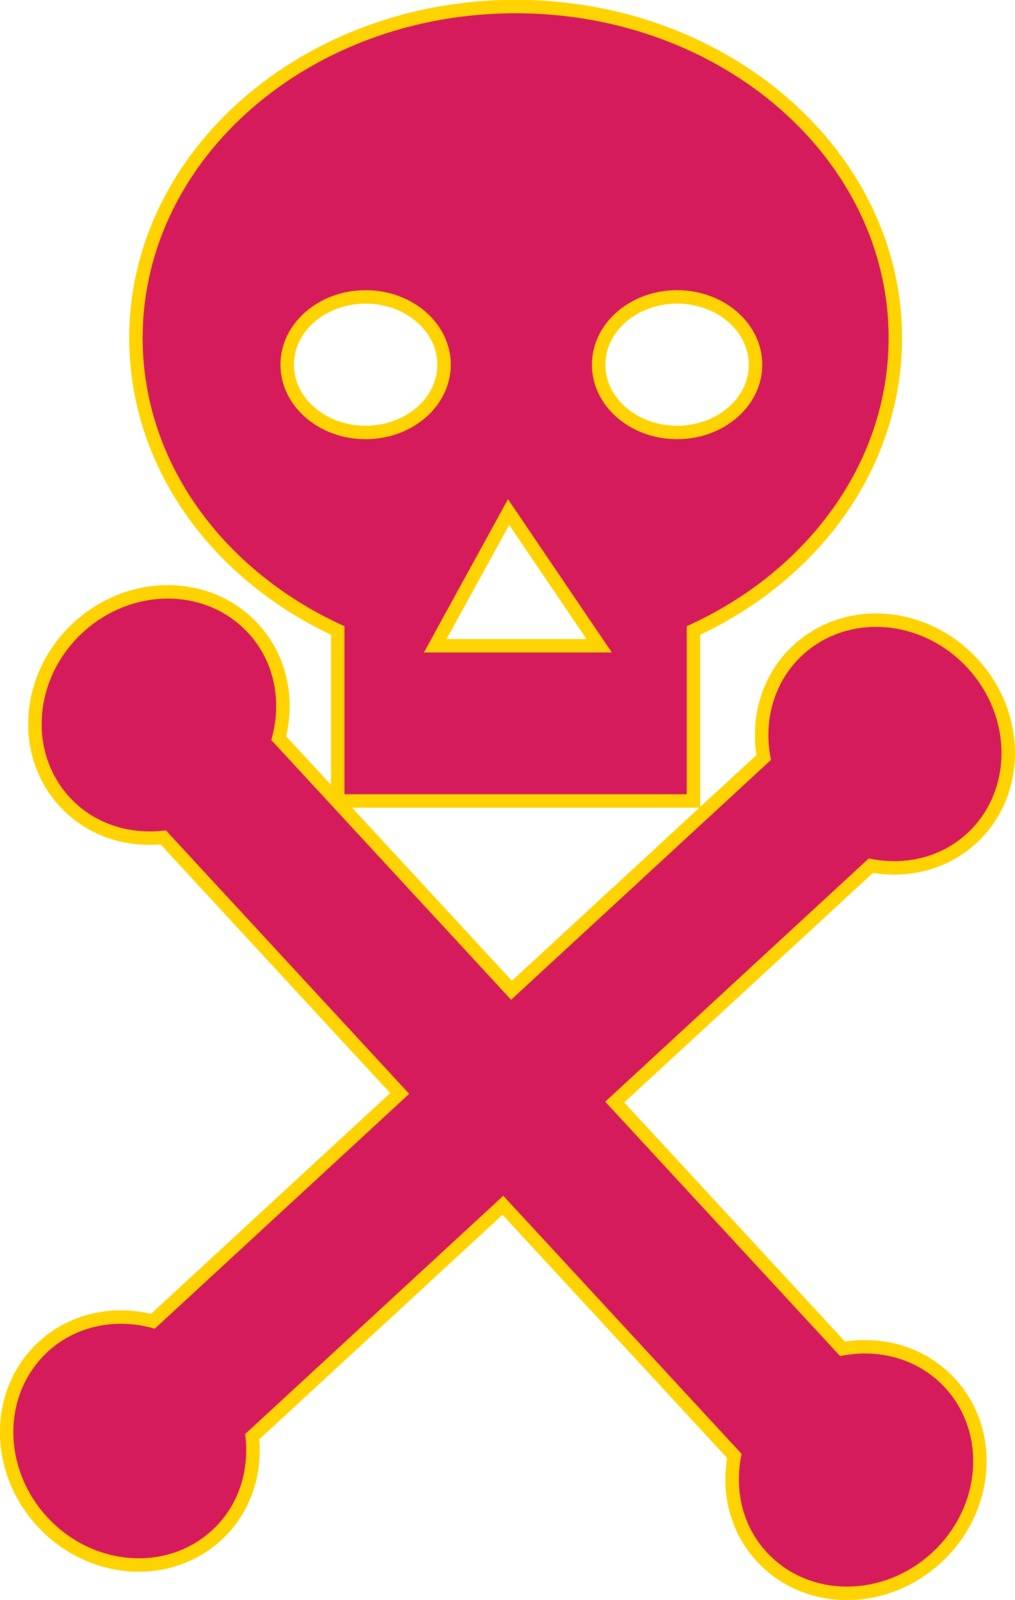 Illustration of a Poison Symbol icon, the skull-and-crossbones symbol , consisting of a human skull and two bones crossed together behind the skull, generally used as a warning of danger, particularly in regard to poisonous substances